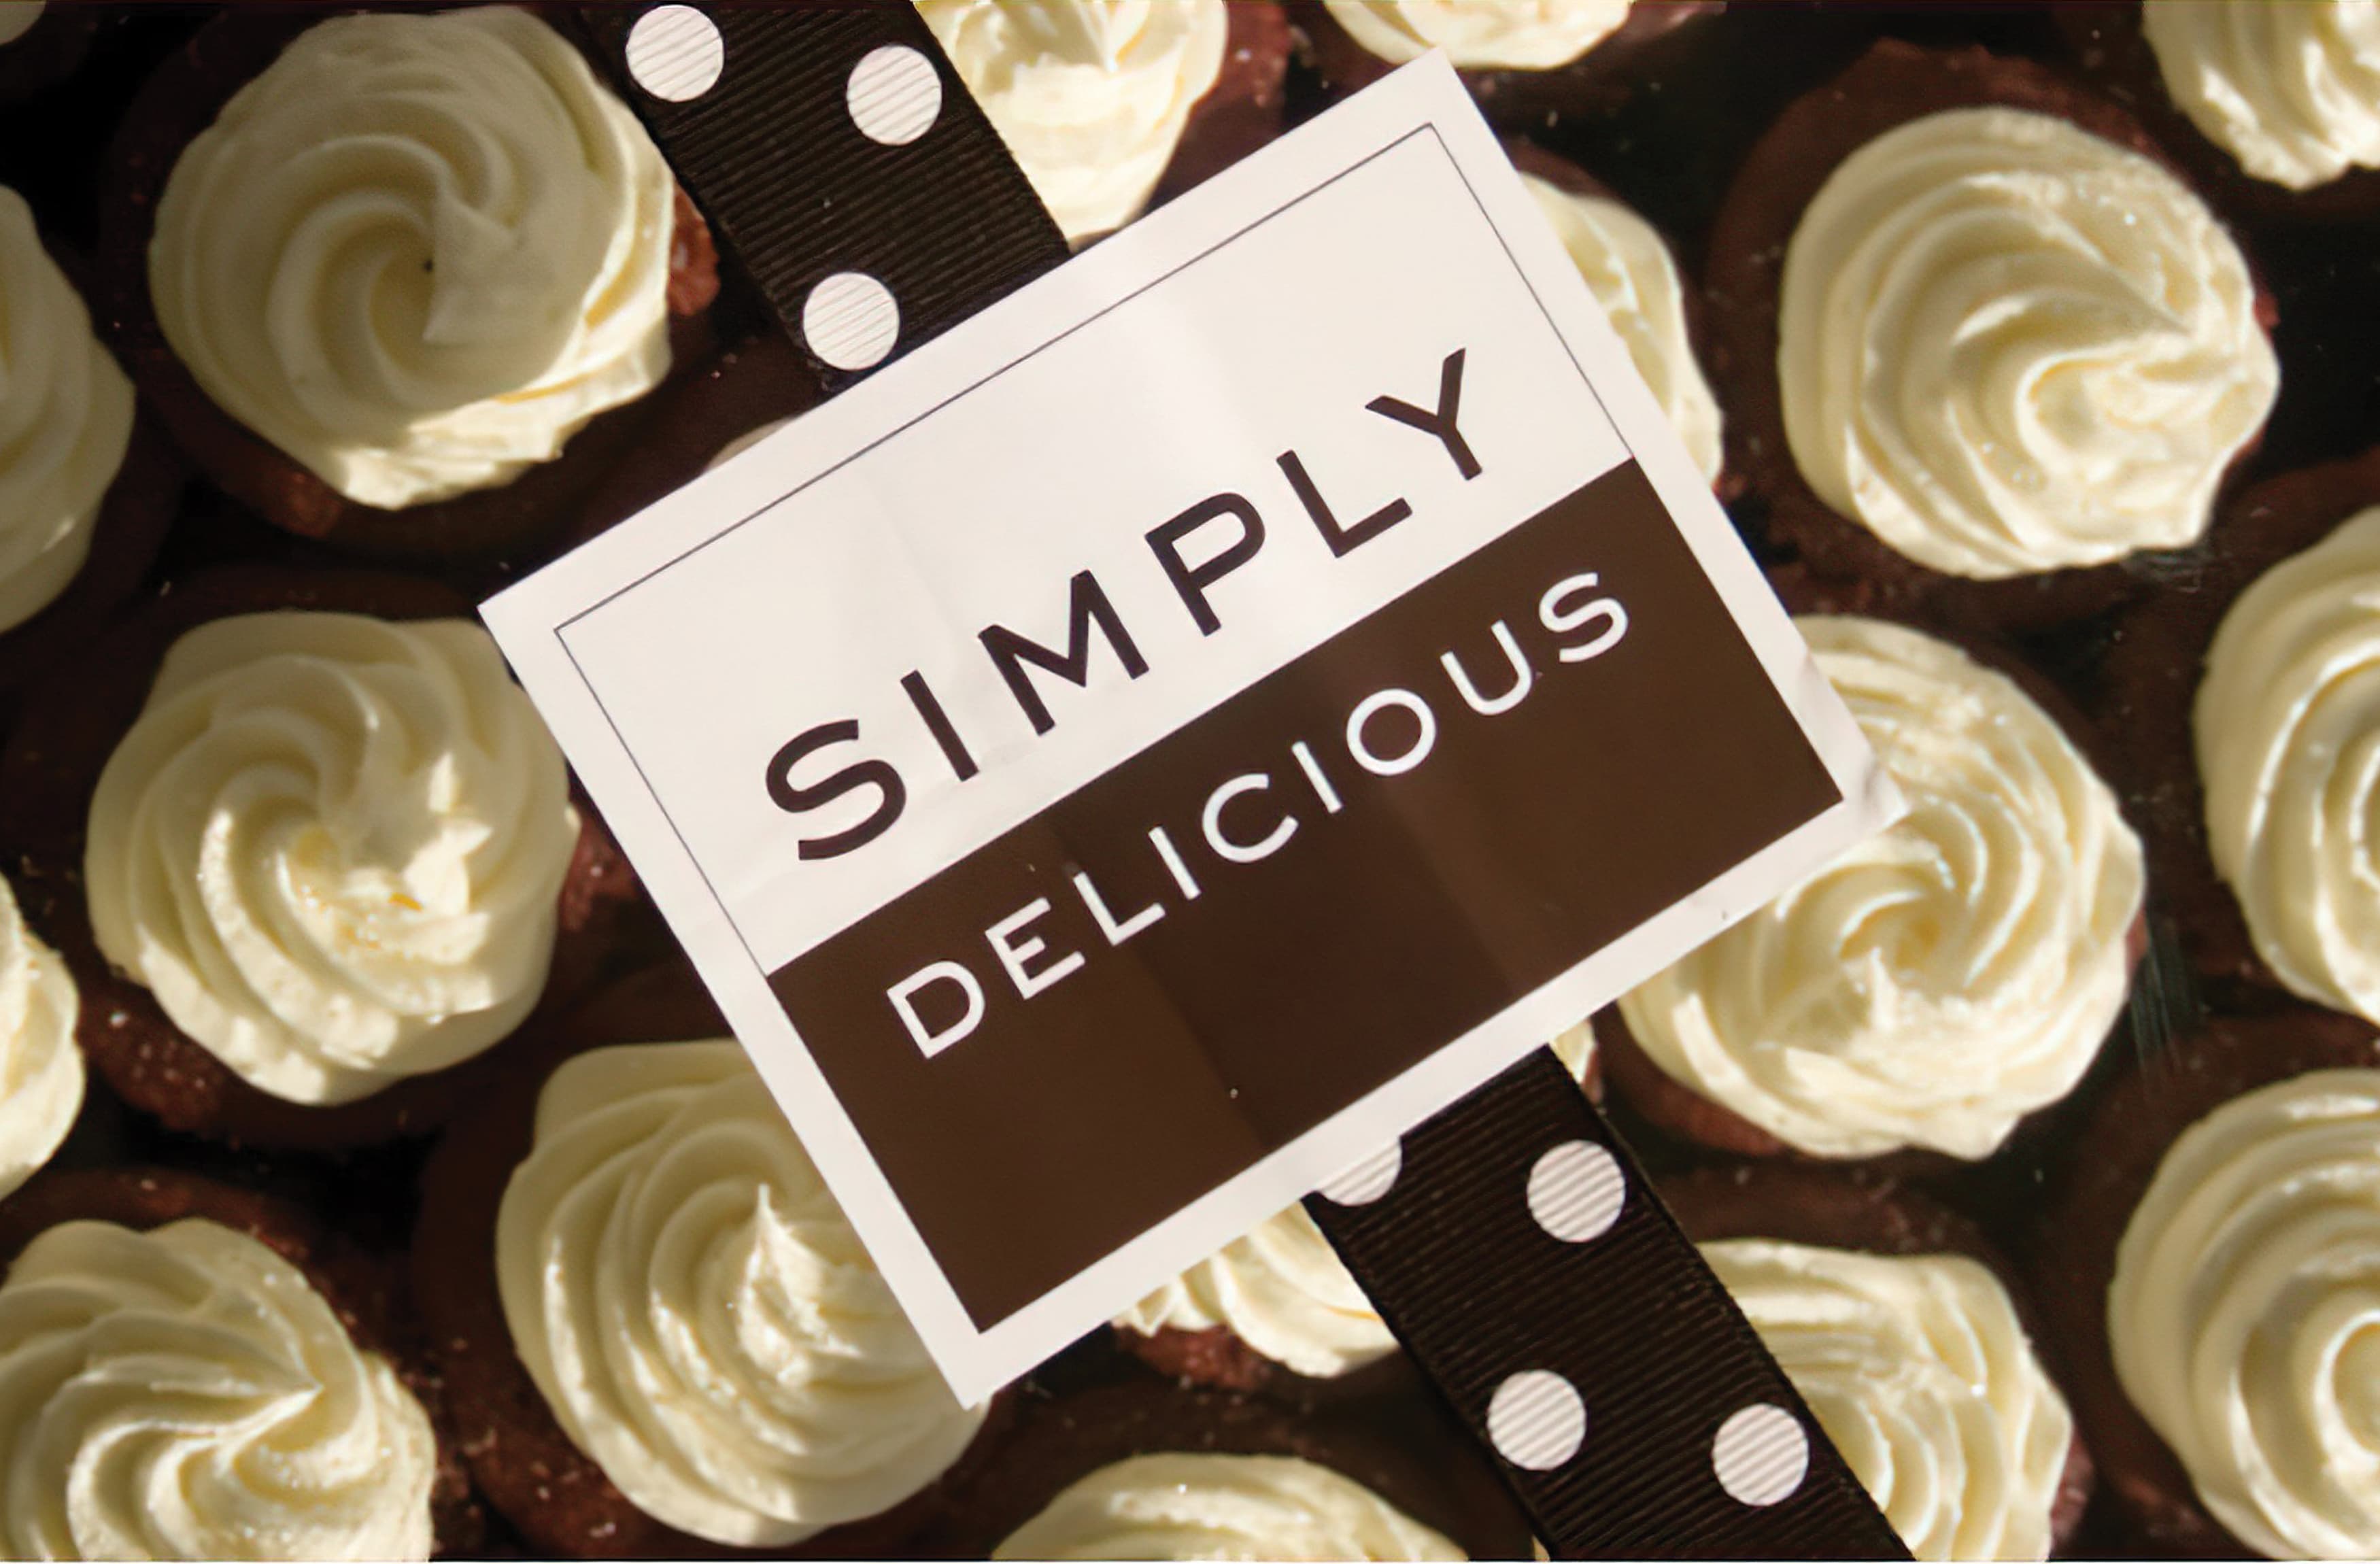 The new Simply Delicious brand on top of some baked goods.